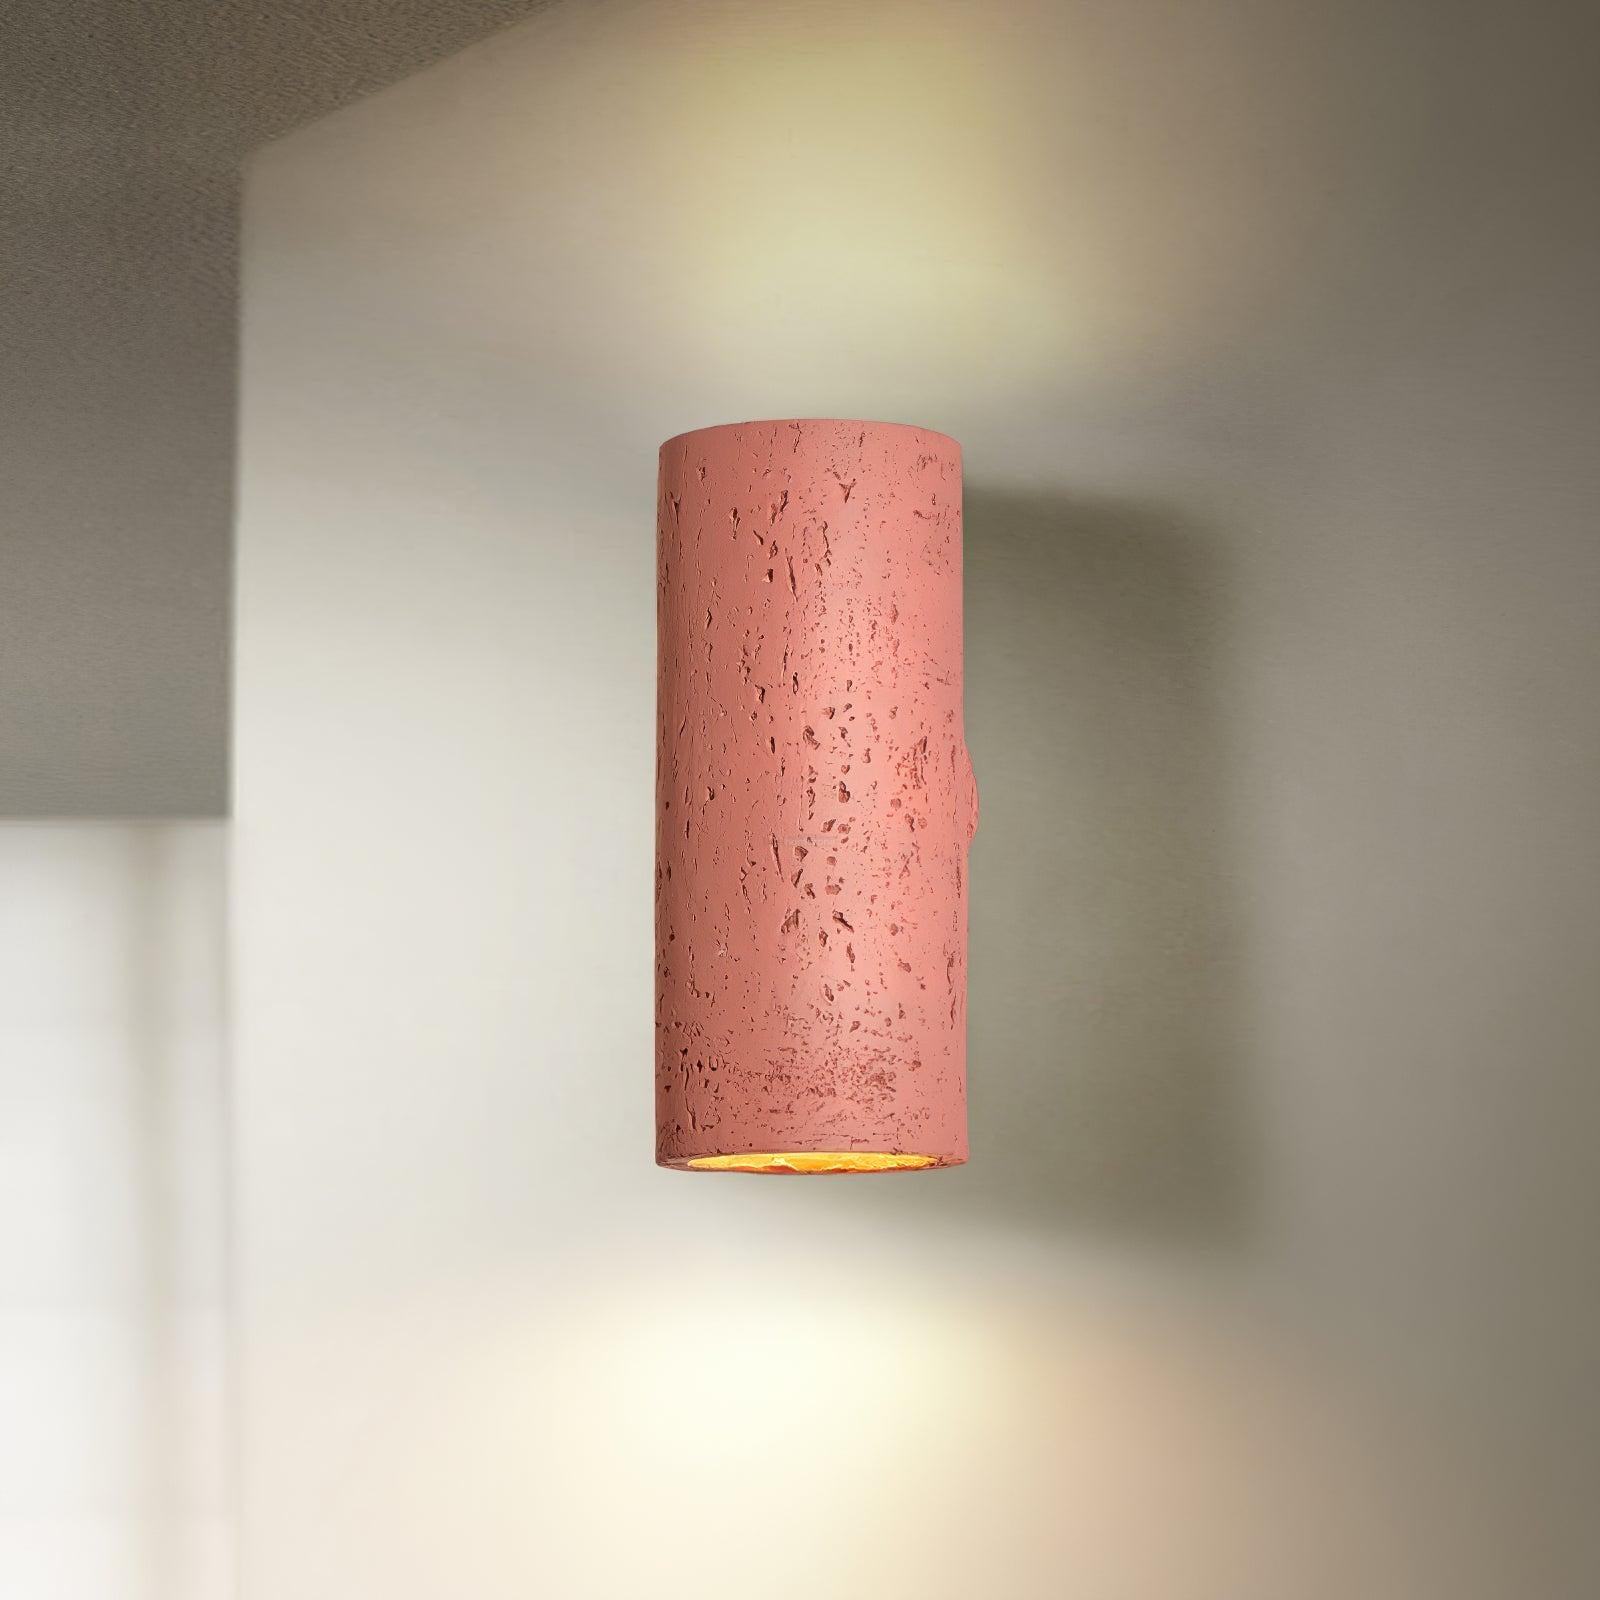 Hans Wall Sconce